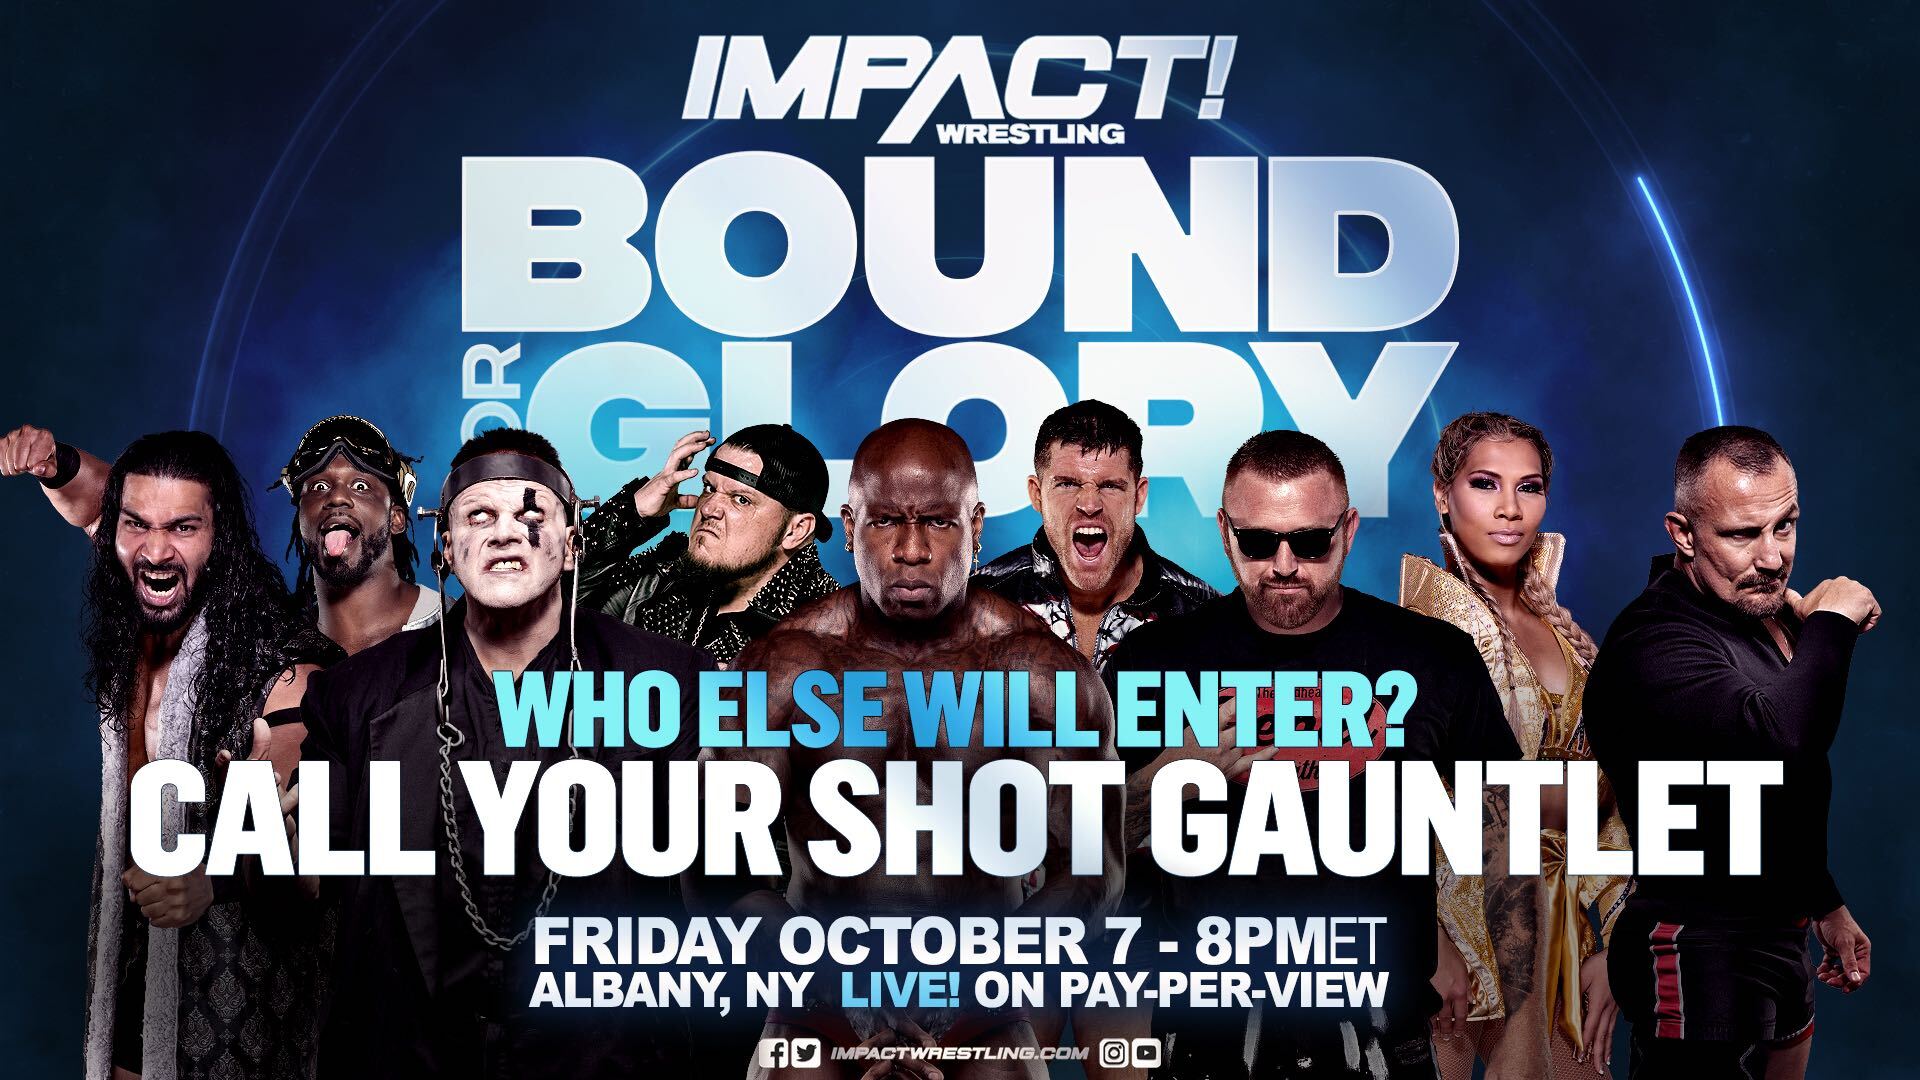 High-Stakes Call Your Shot Gauntlet Returns to Bound For Glory – IMPACT Wrestling